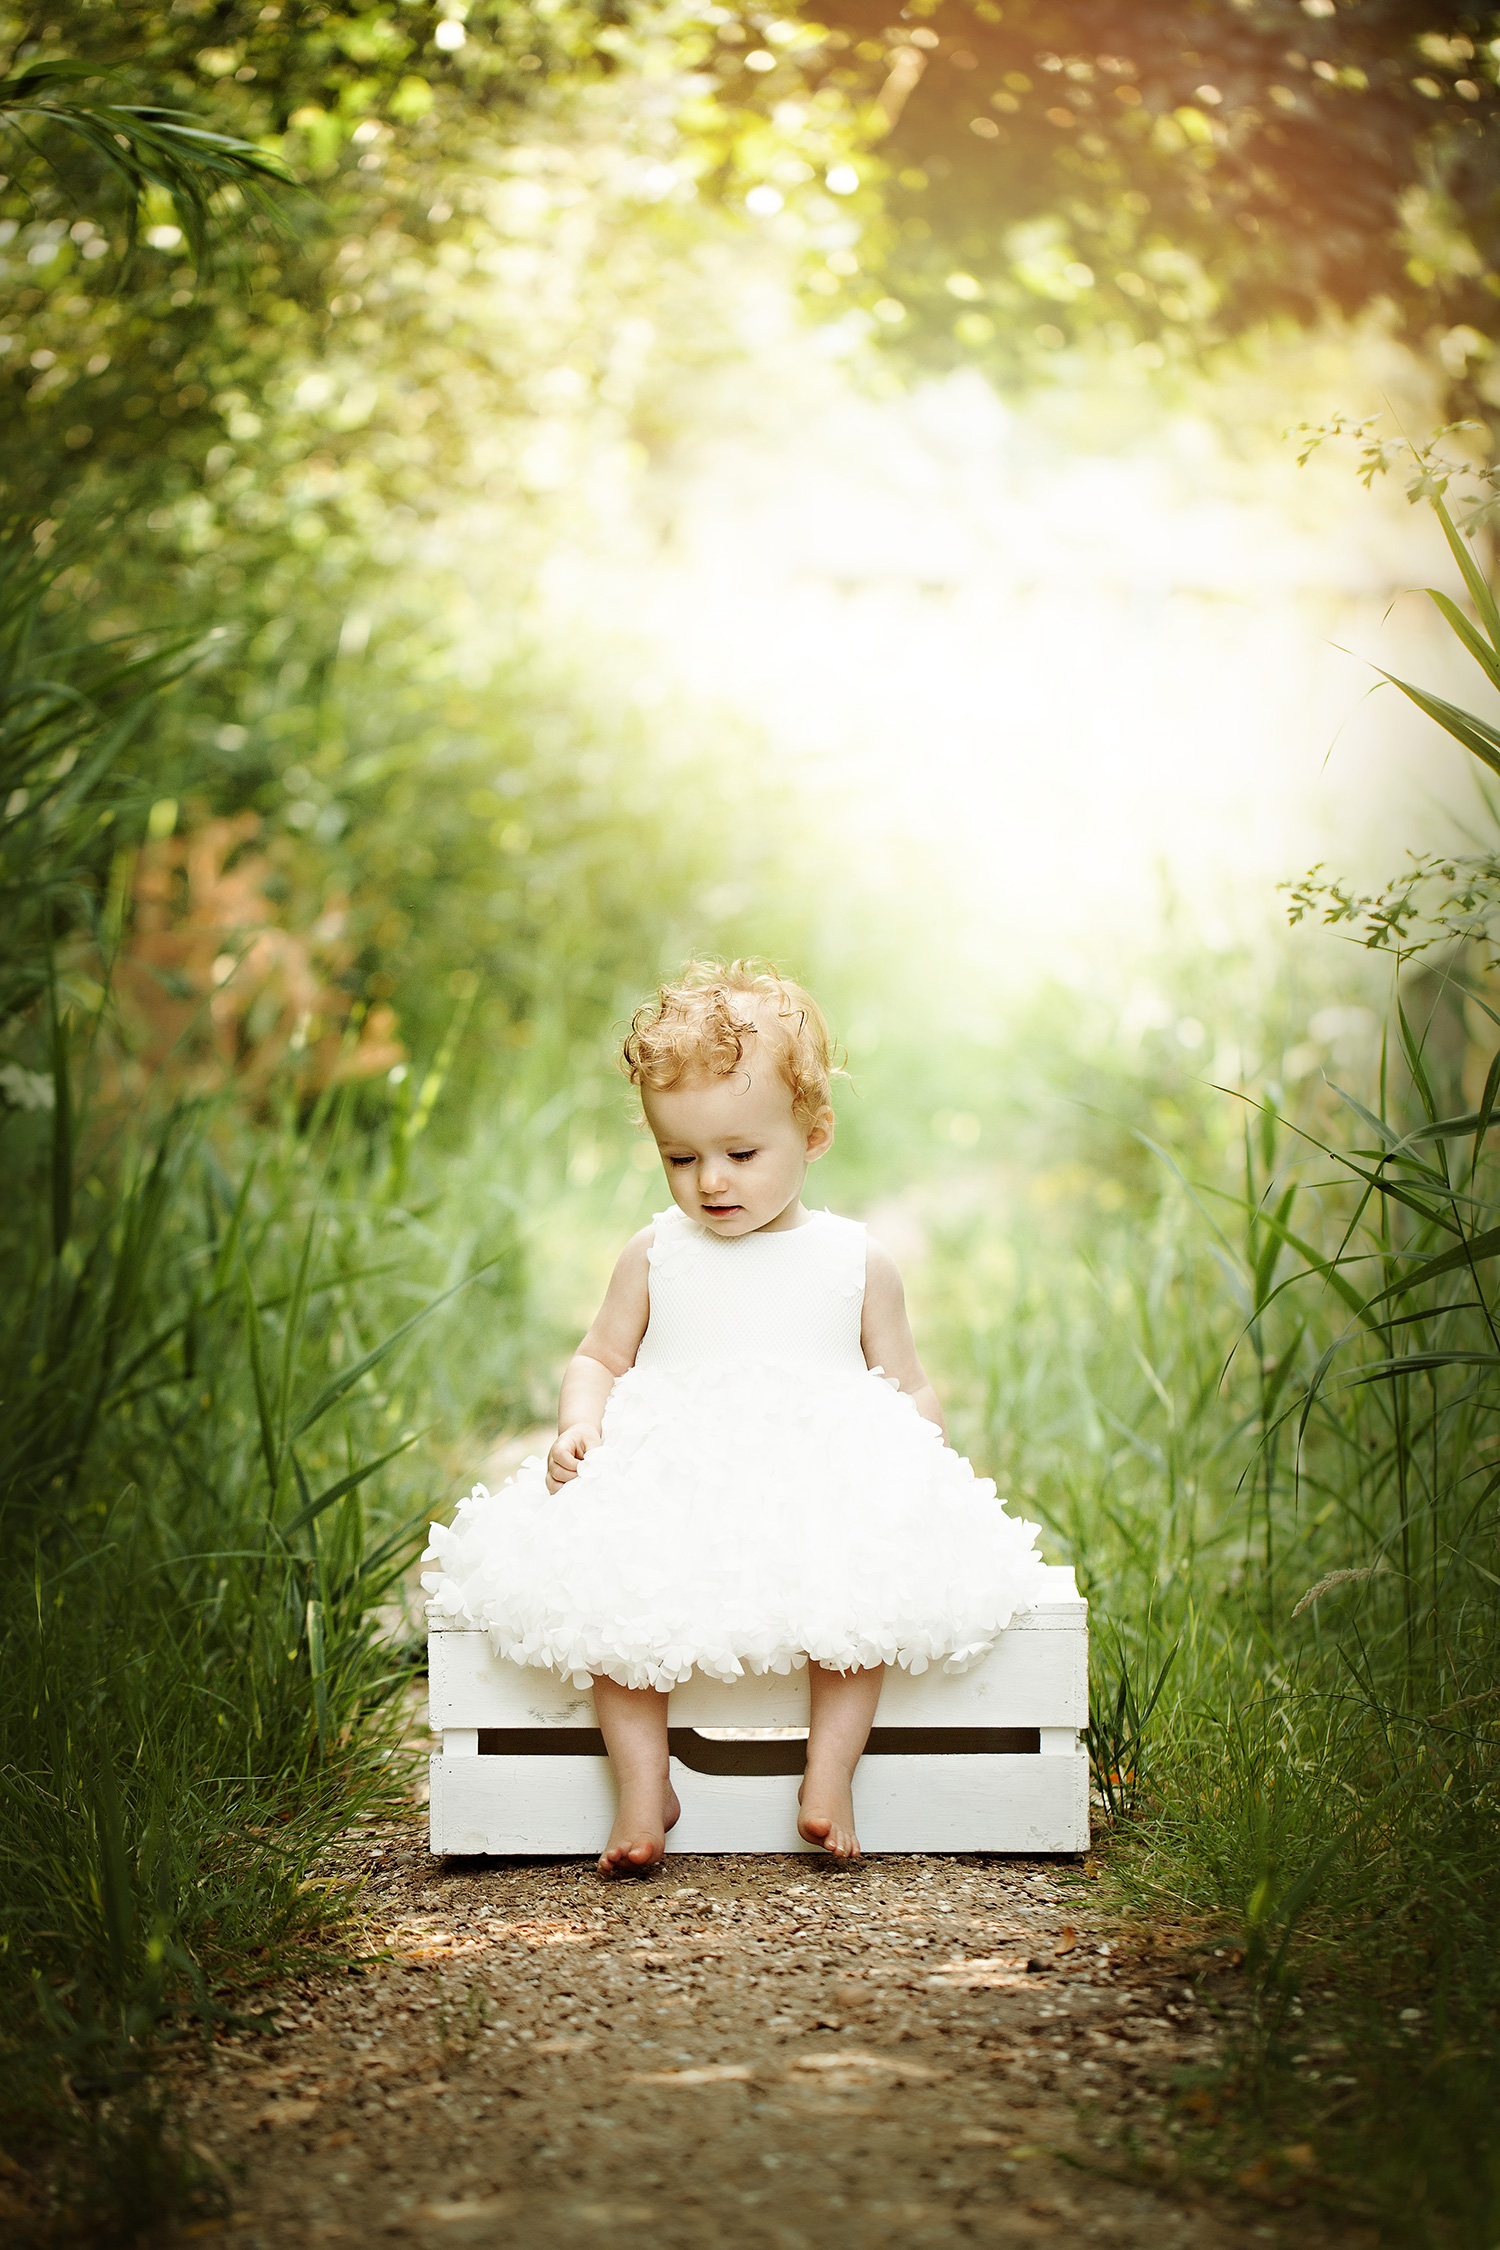 baby-fotoshoot-outdoor-fashion